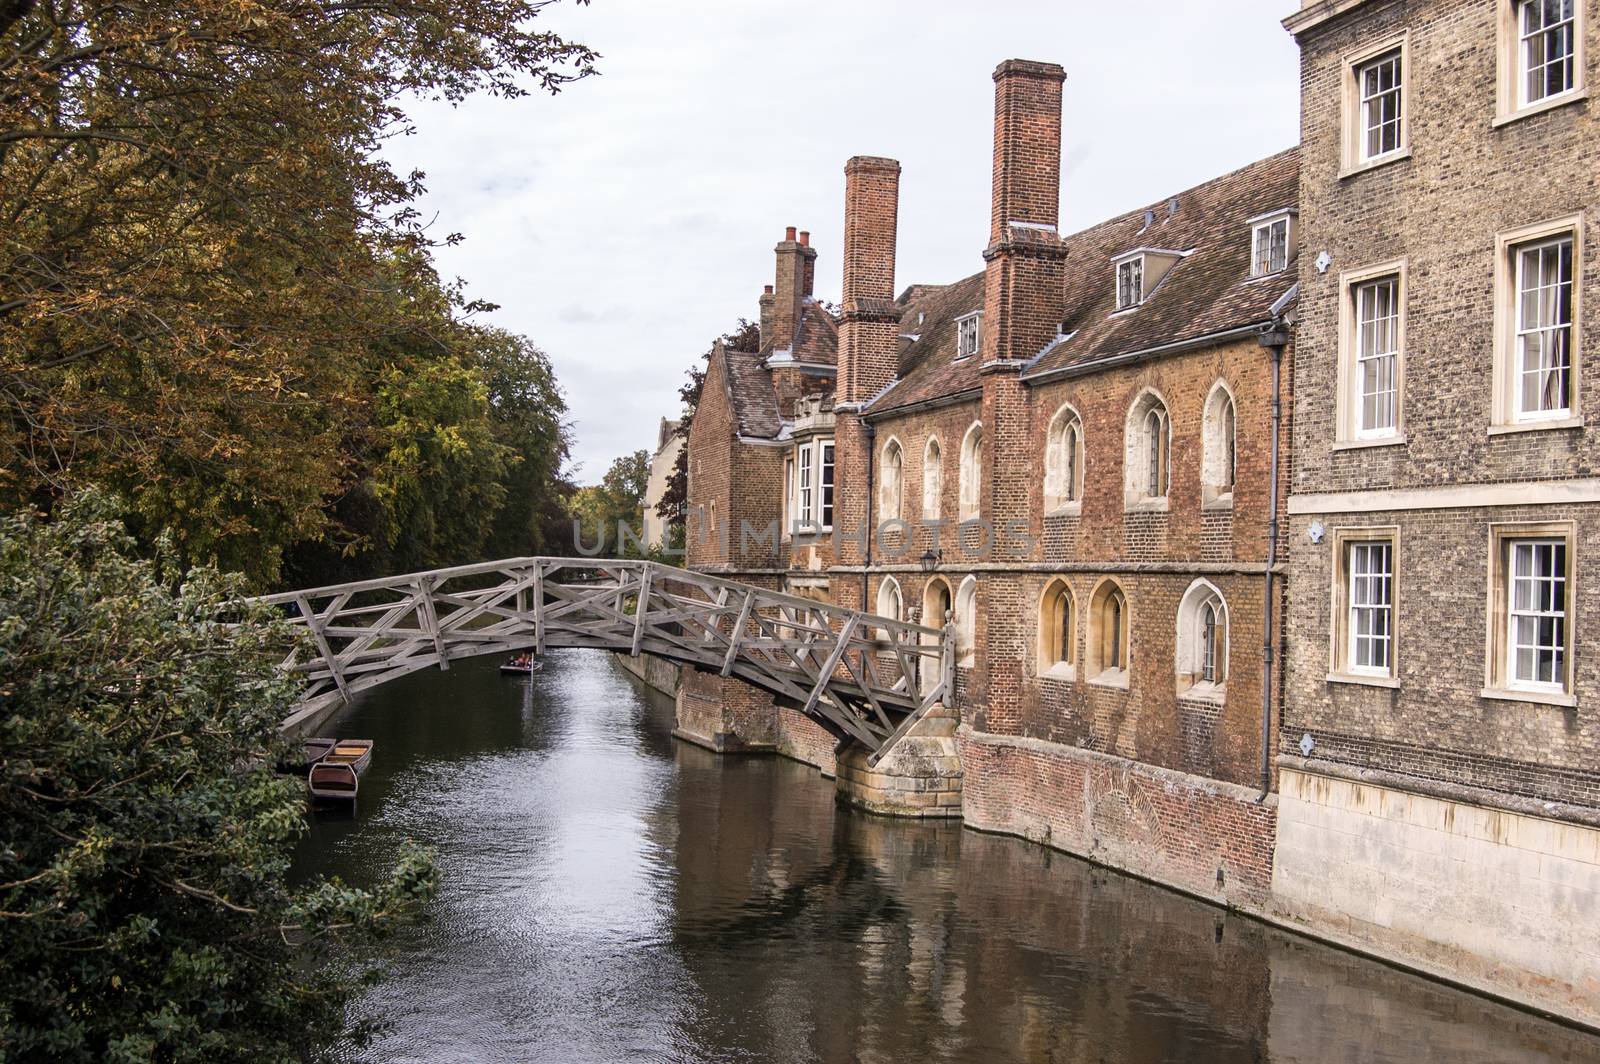 The wooden footbridge at Queens' College, Cambridge known as the Mathematical Bridge. Part of the University of Cambridge.